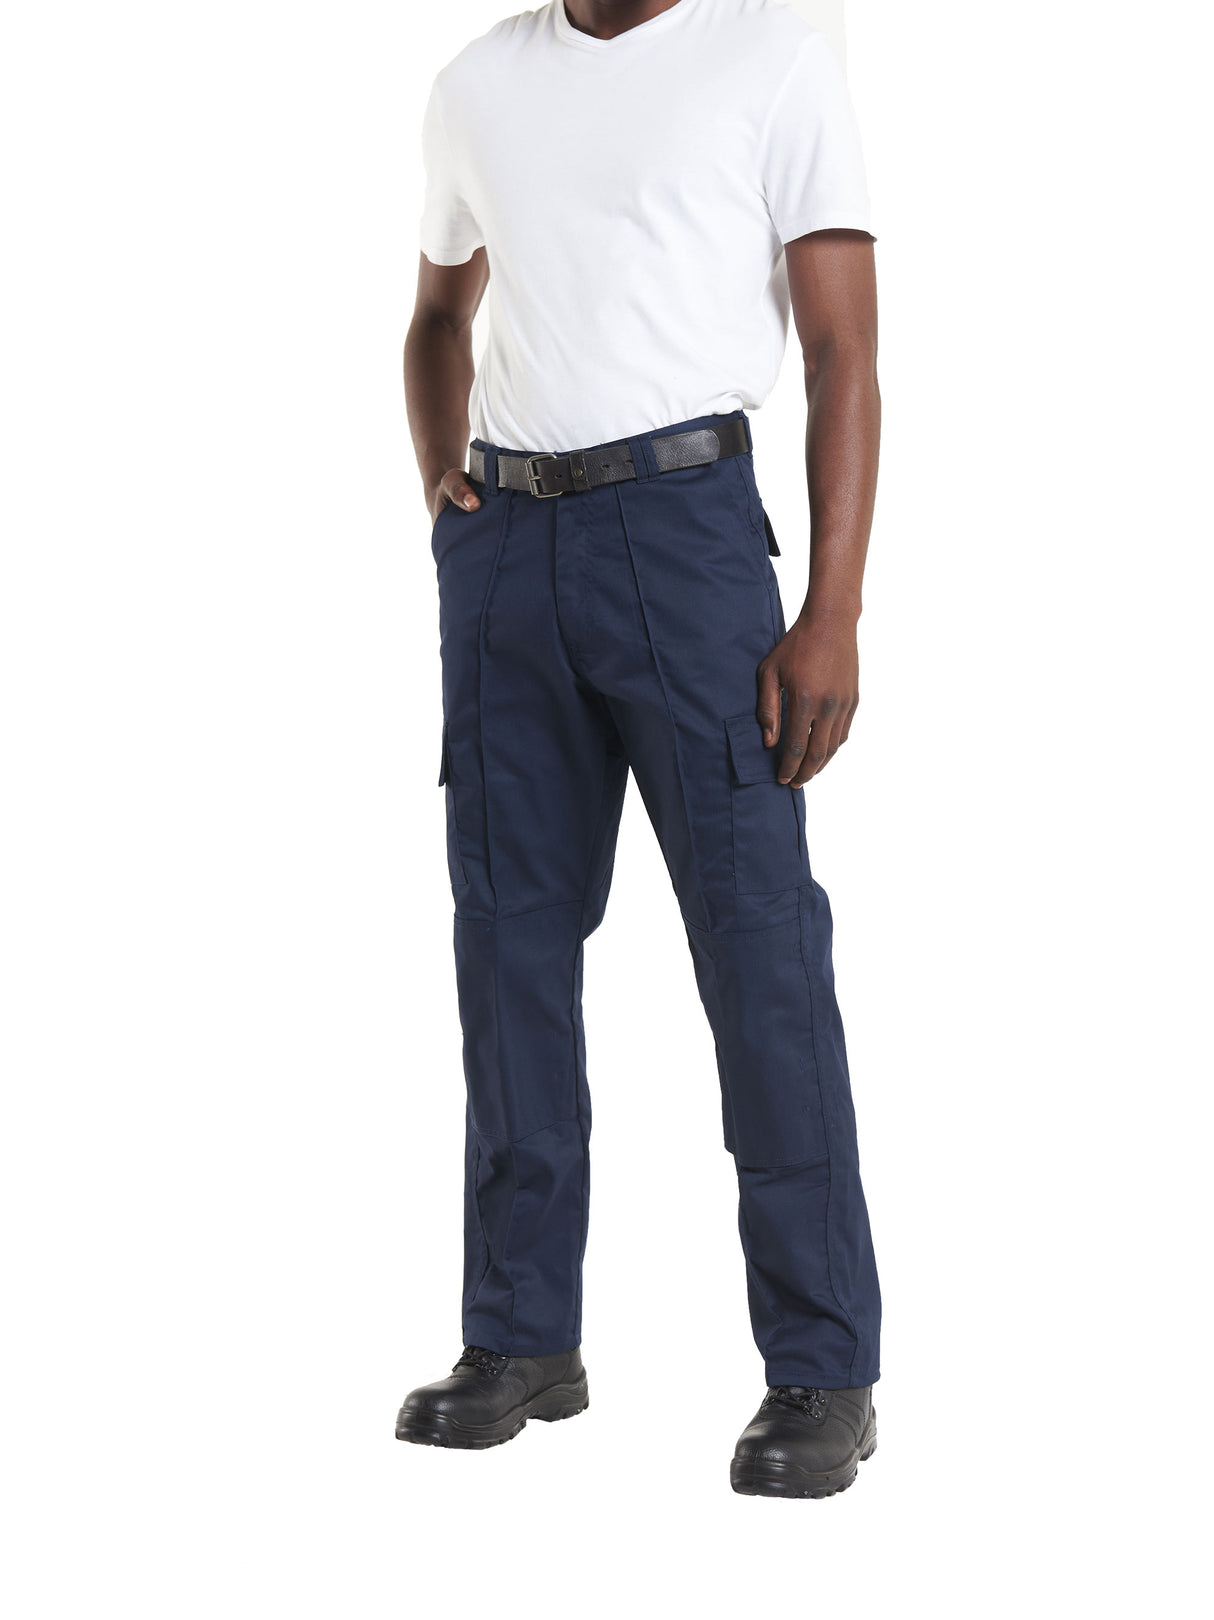 Uneek Cargo Trouser with Knee Pad Pockets